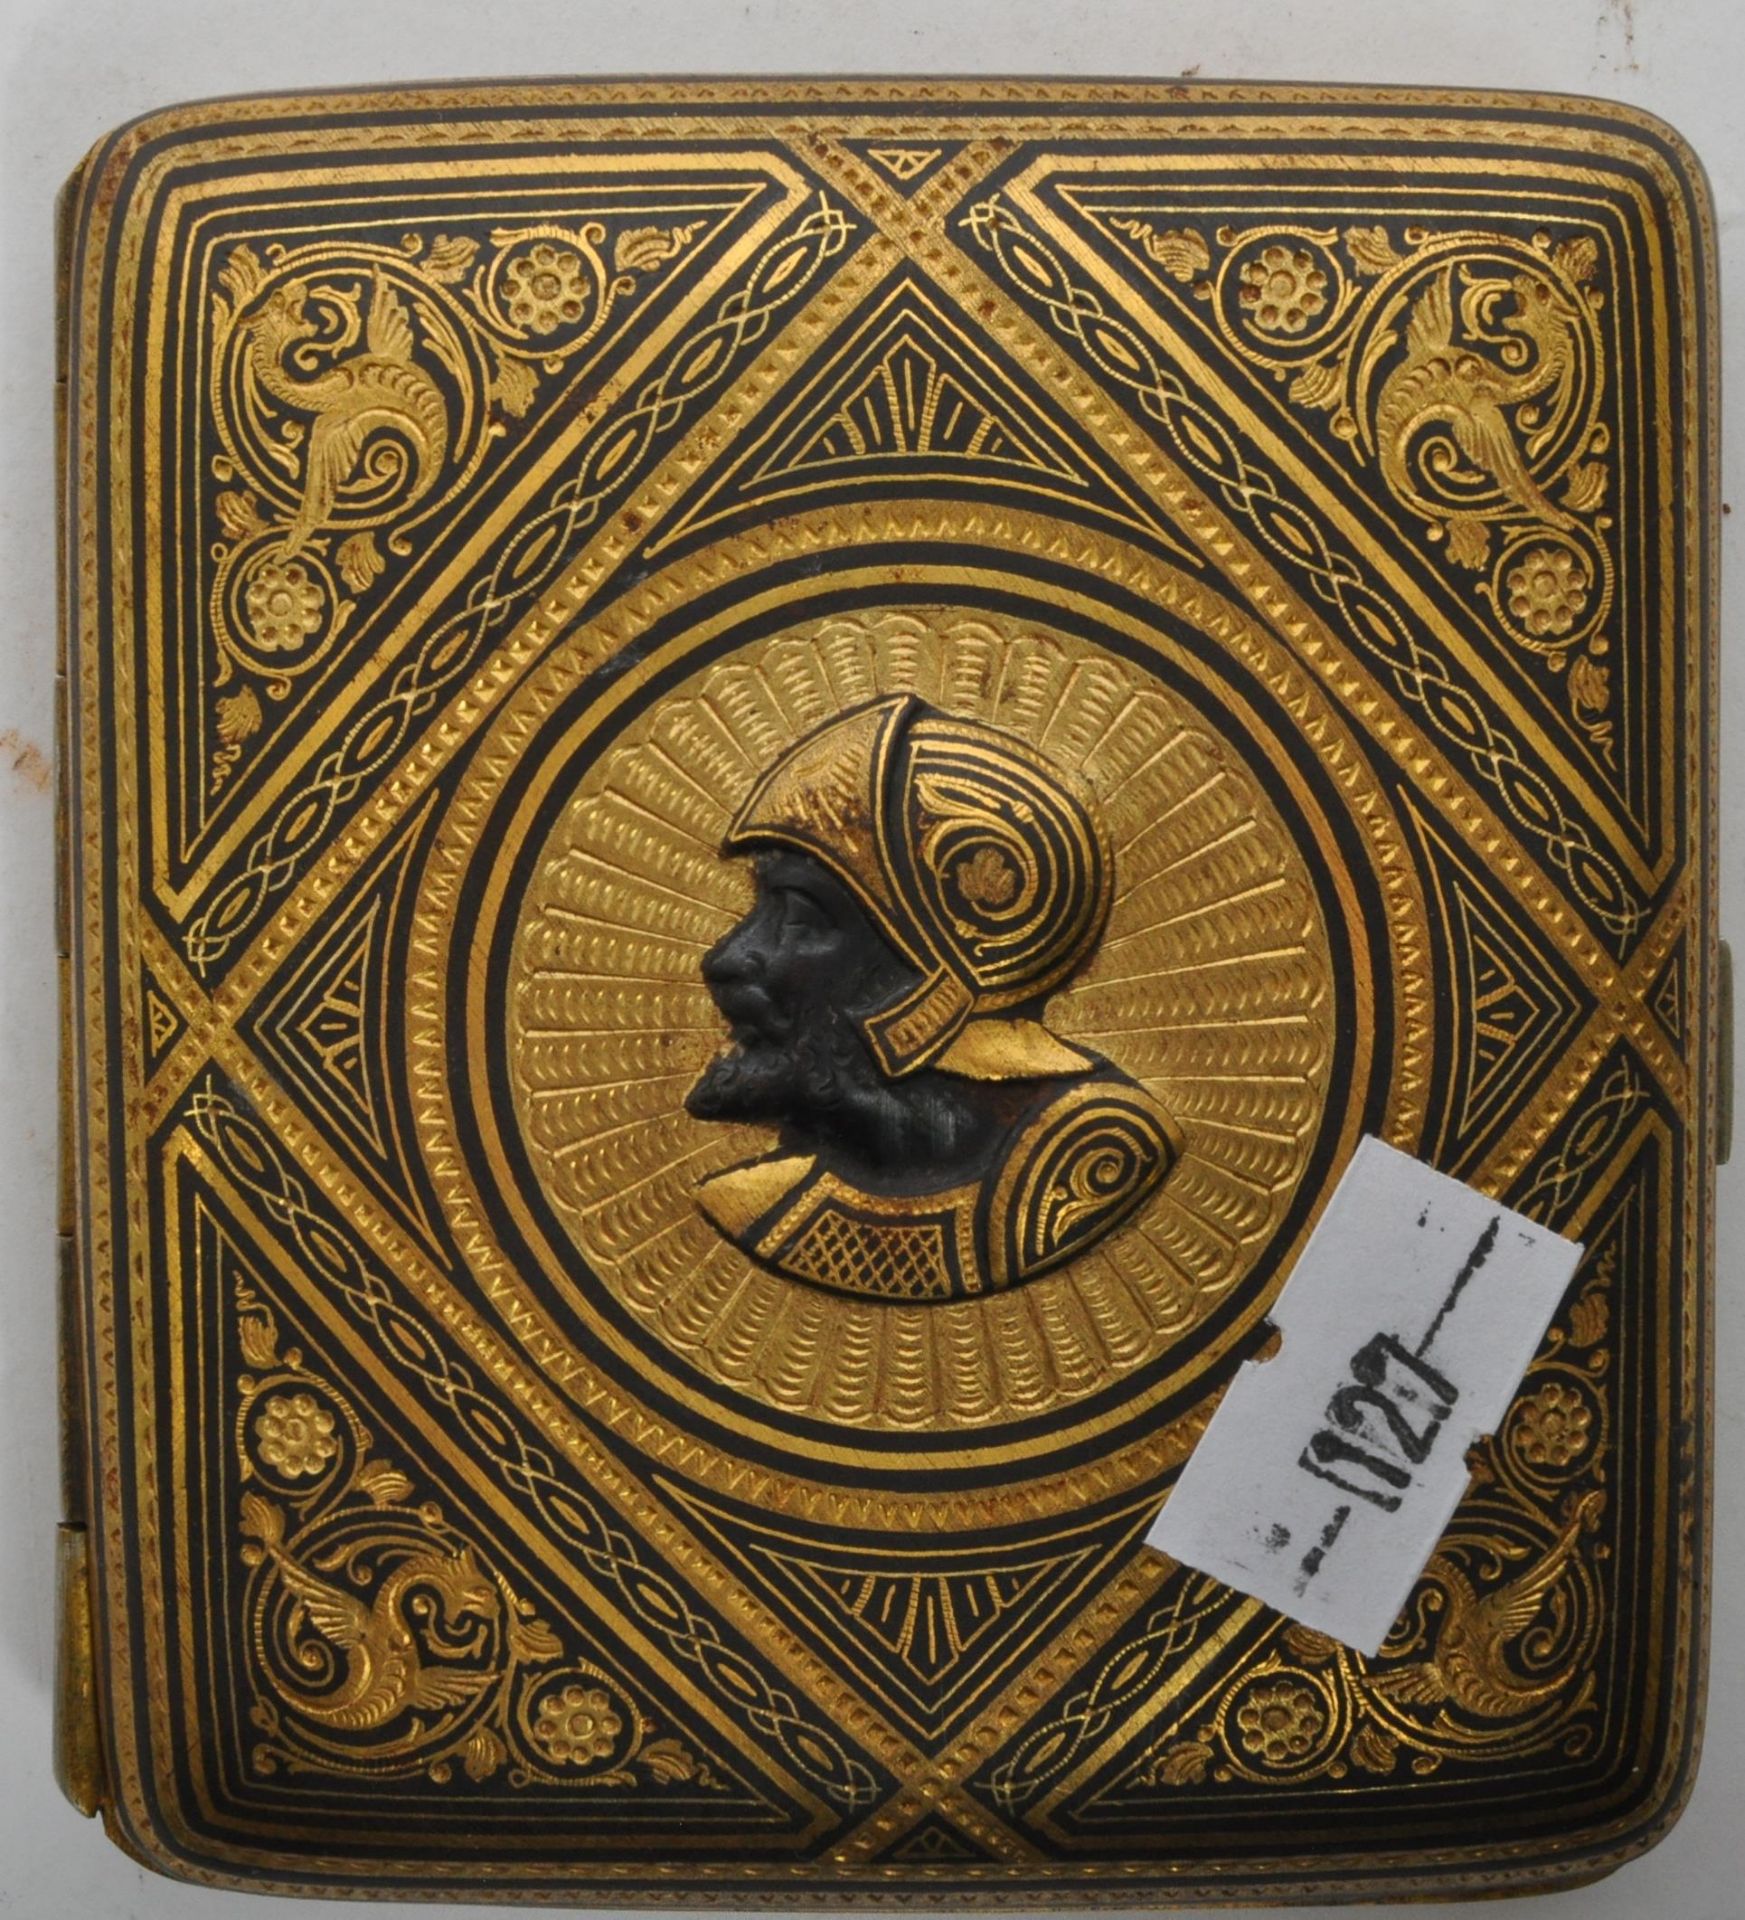 EARLY 20TH CENTURY TOLEDO GOLD INLAY CIGARETTE CASE - Image 2 of 5